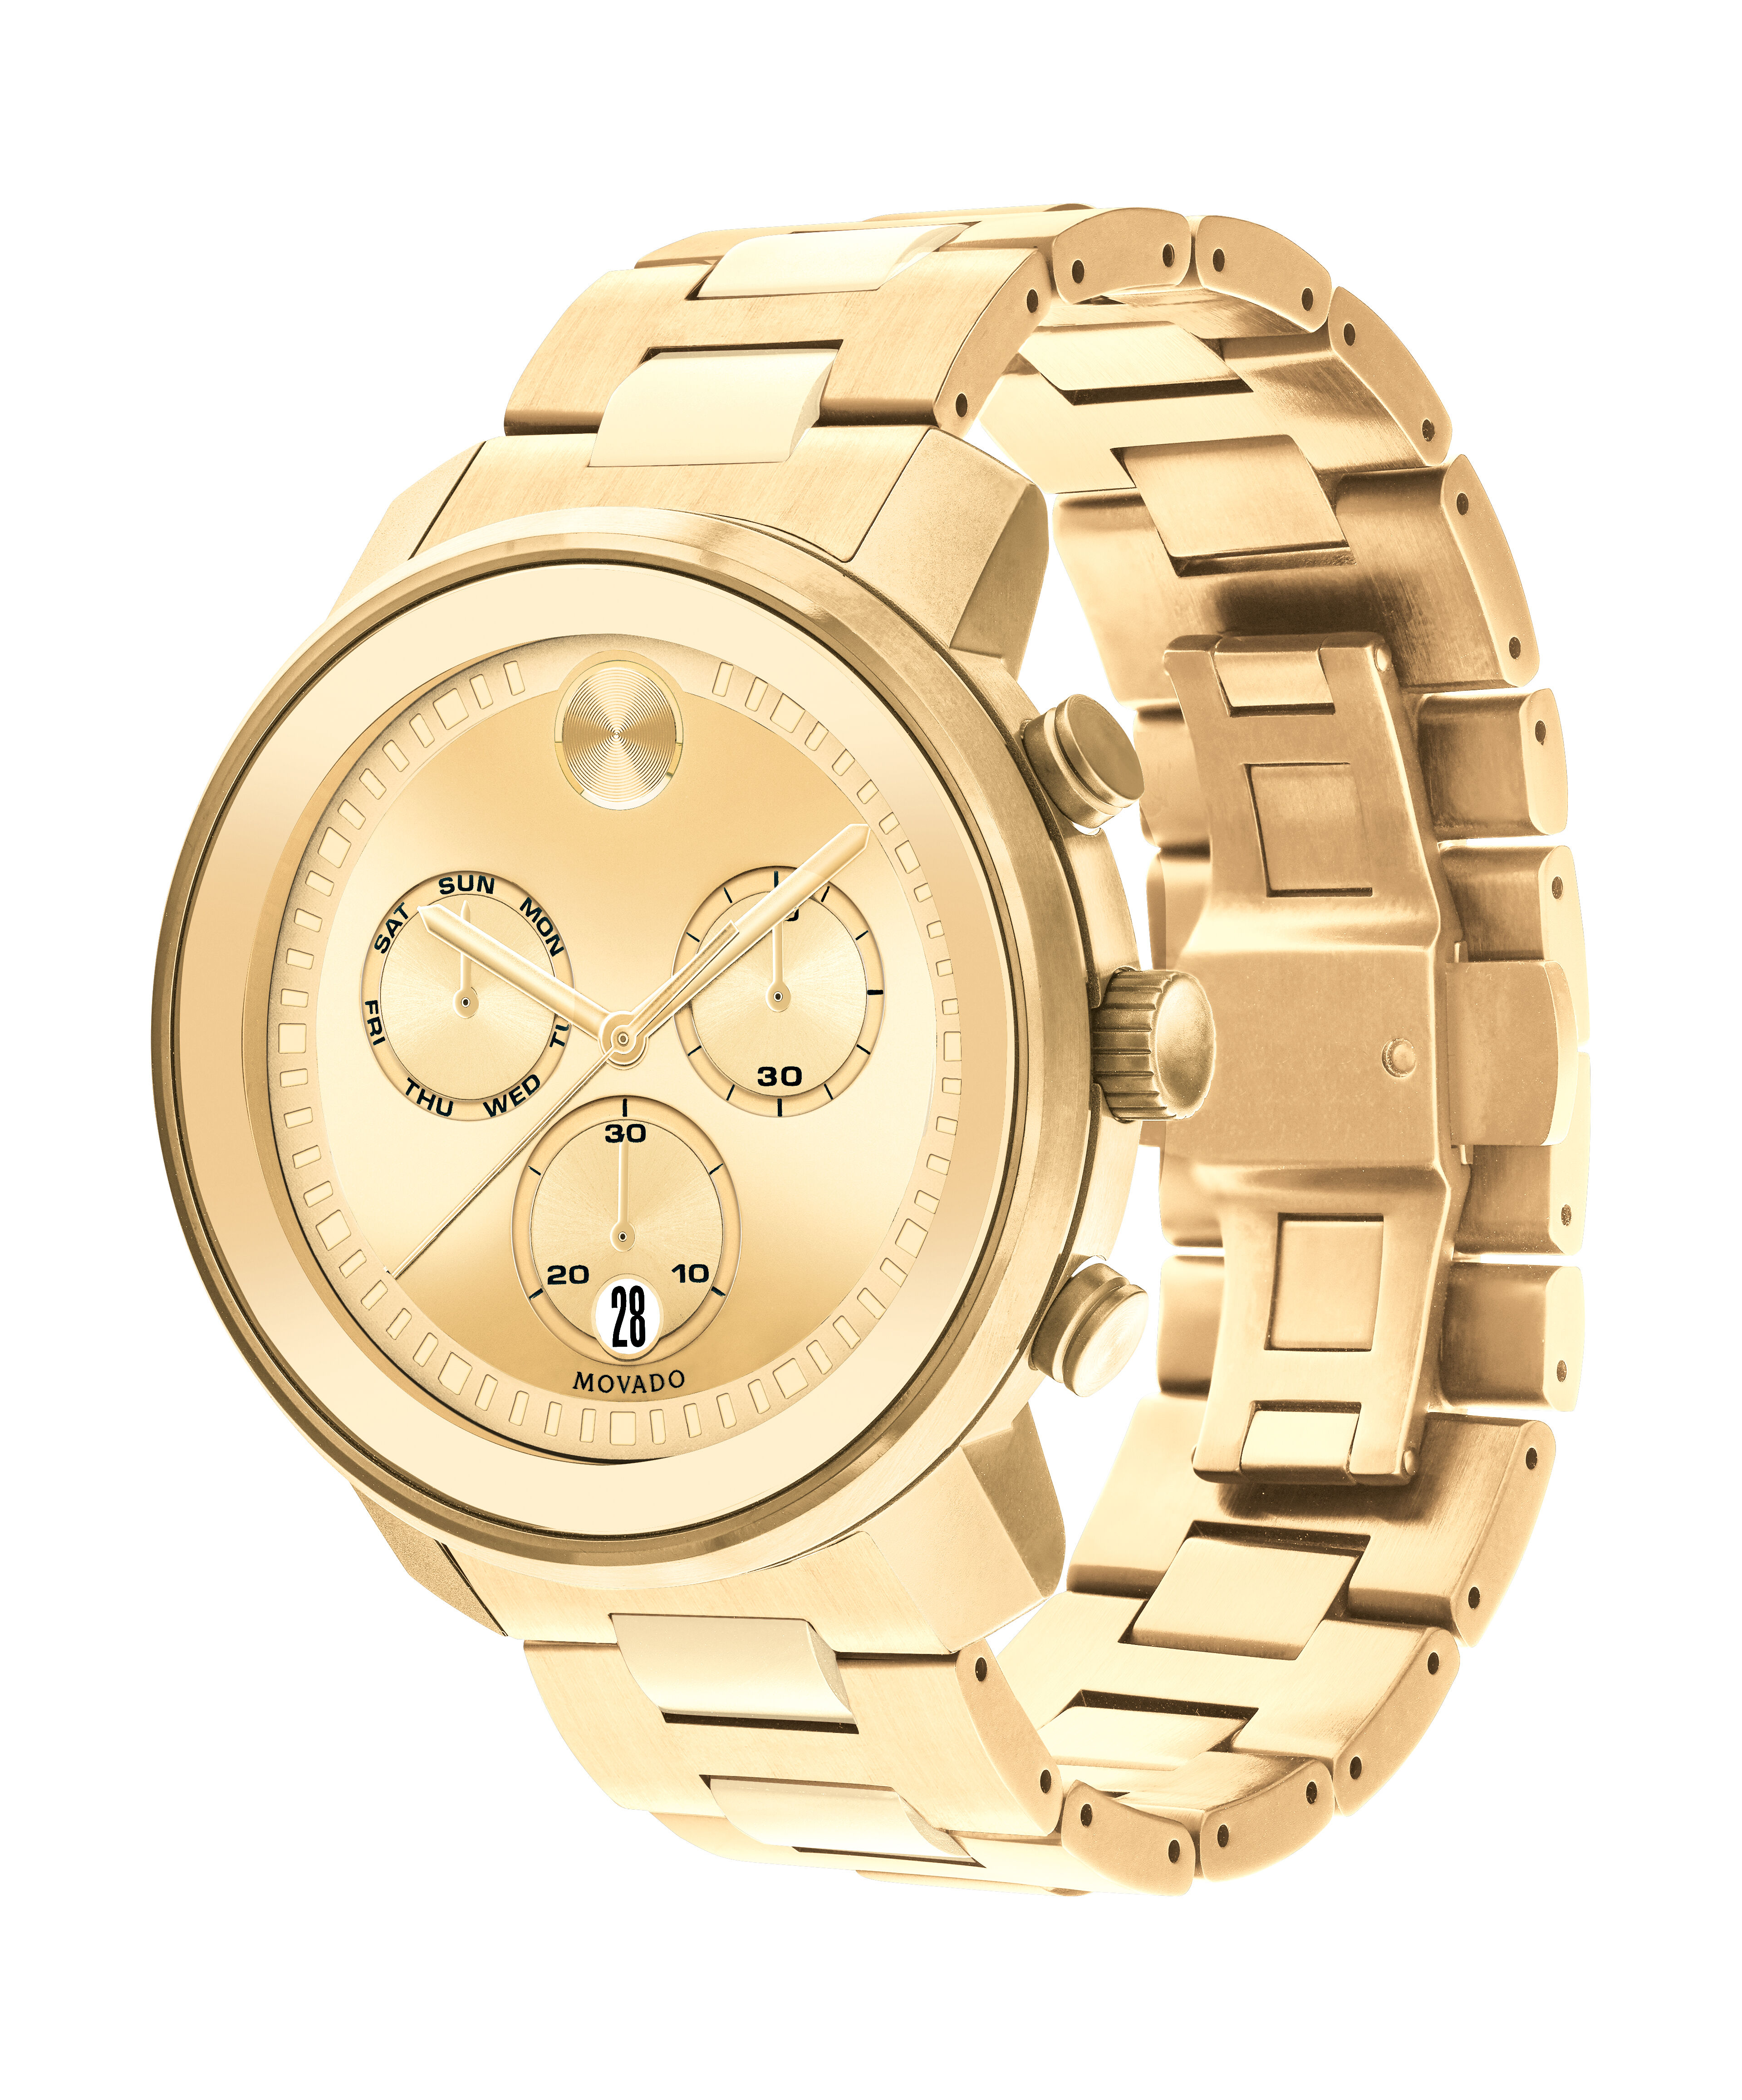 Imitation Gold Coating On Watch Absorbing Into Skin